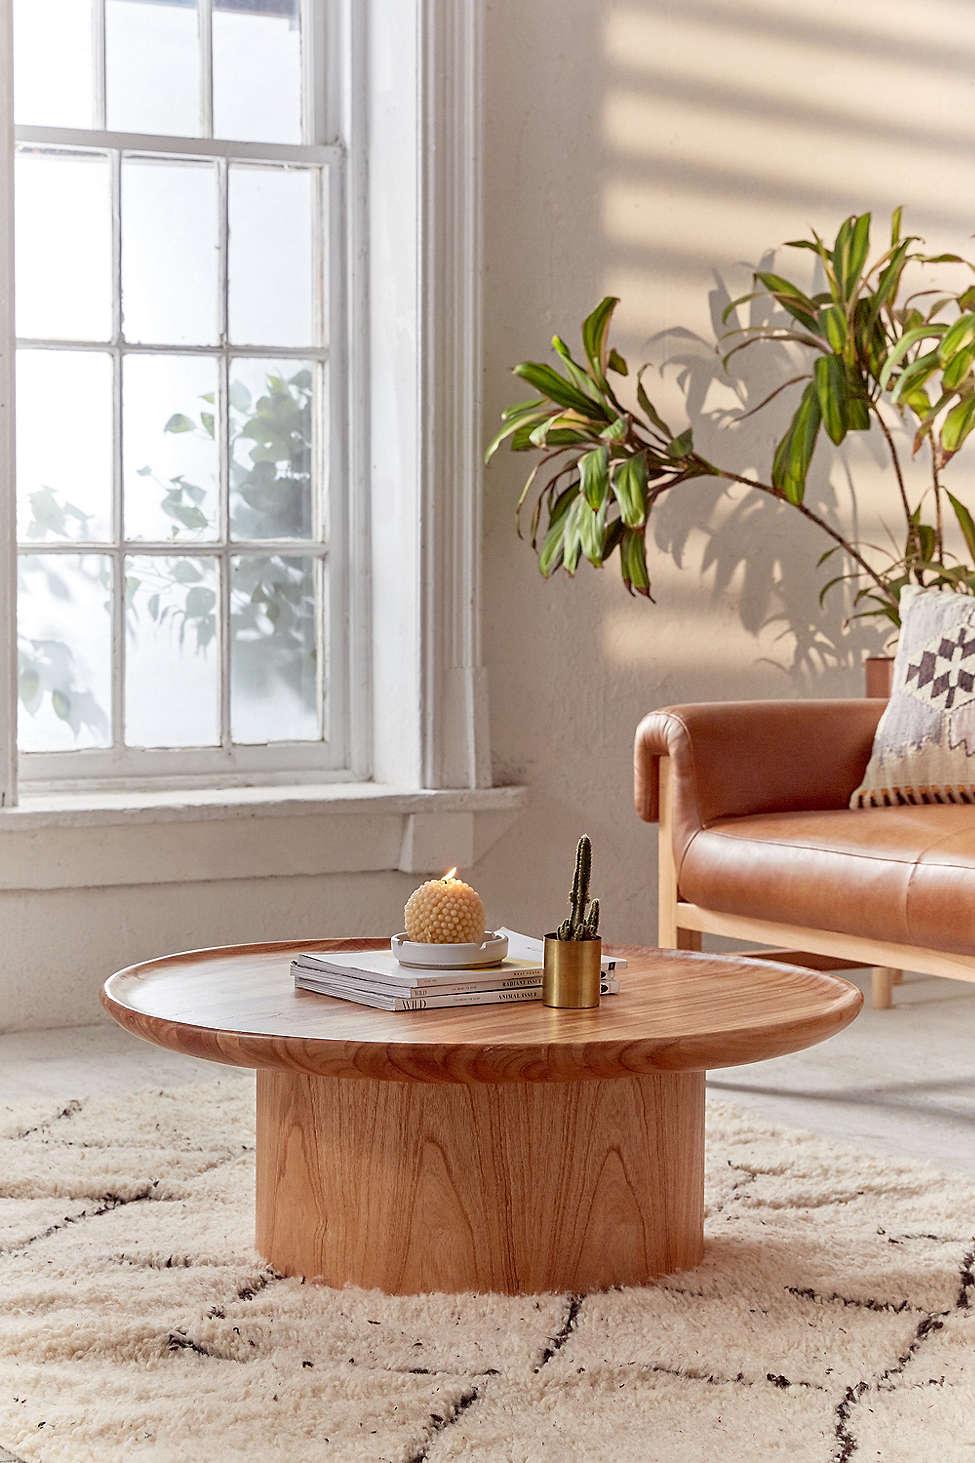 Wooden coffee table from Urban Outfitters